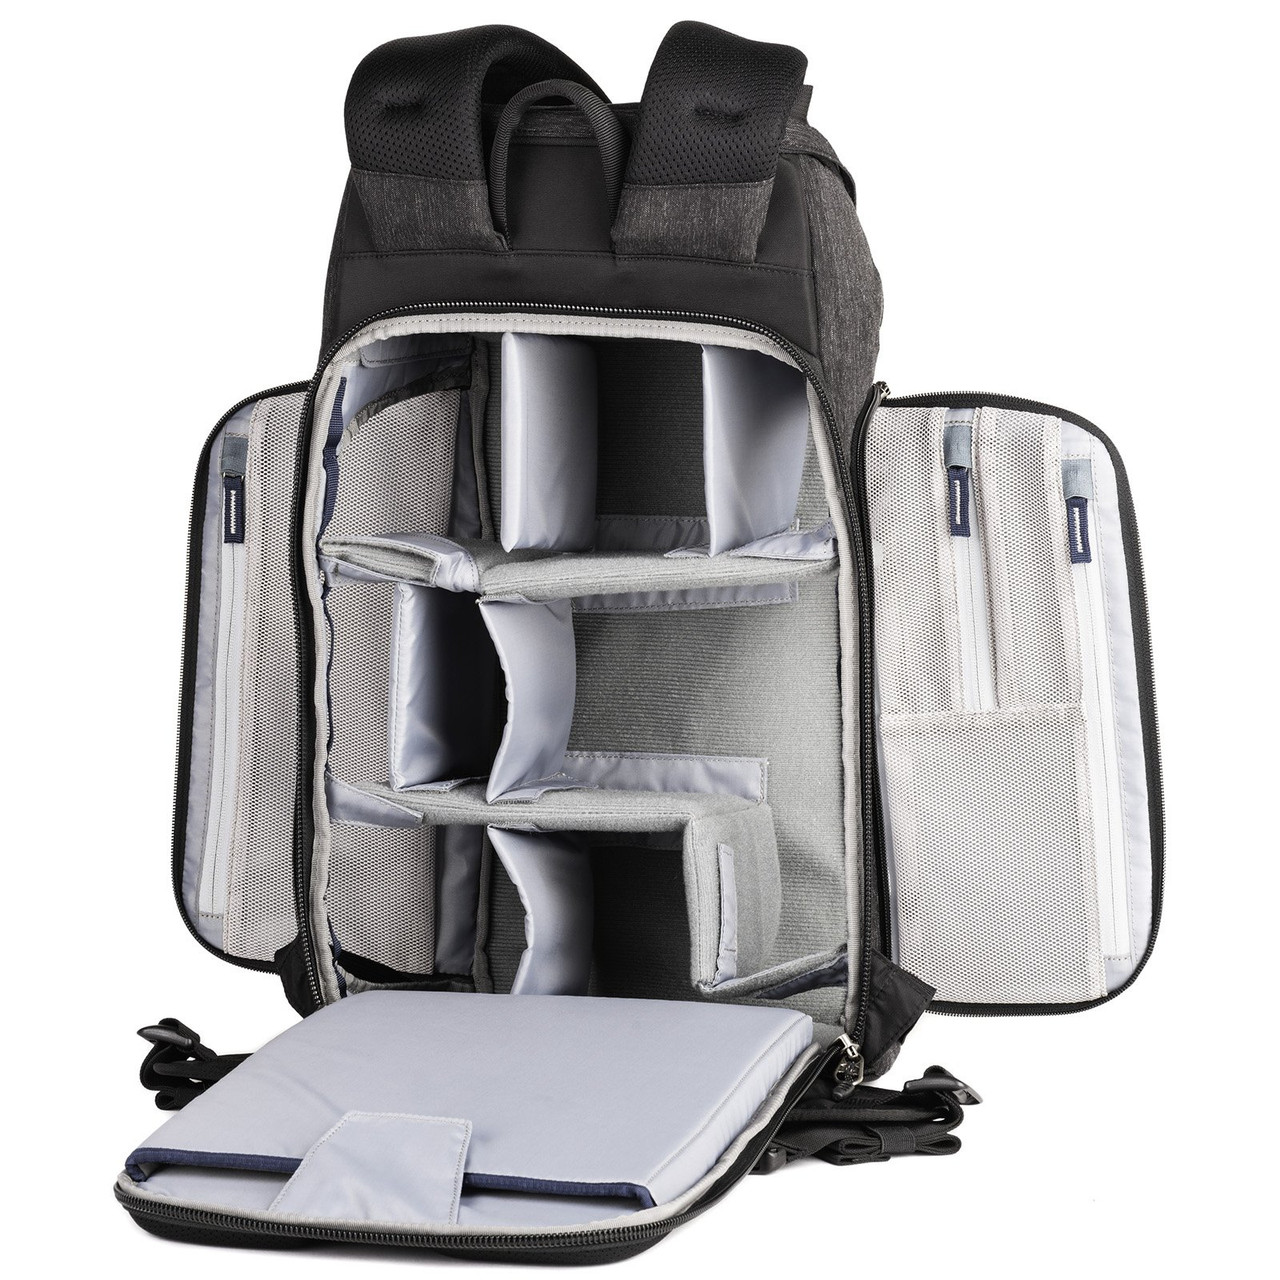 THINK TANK PHOTO PRO URBAN ACCESS BACKPACK 15